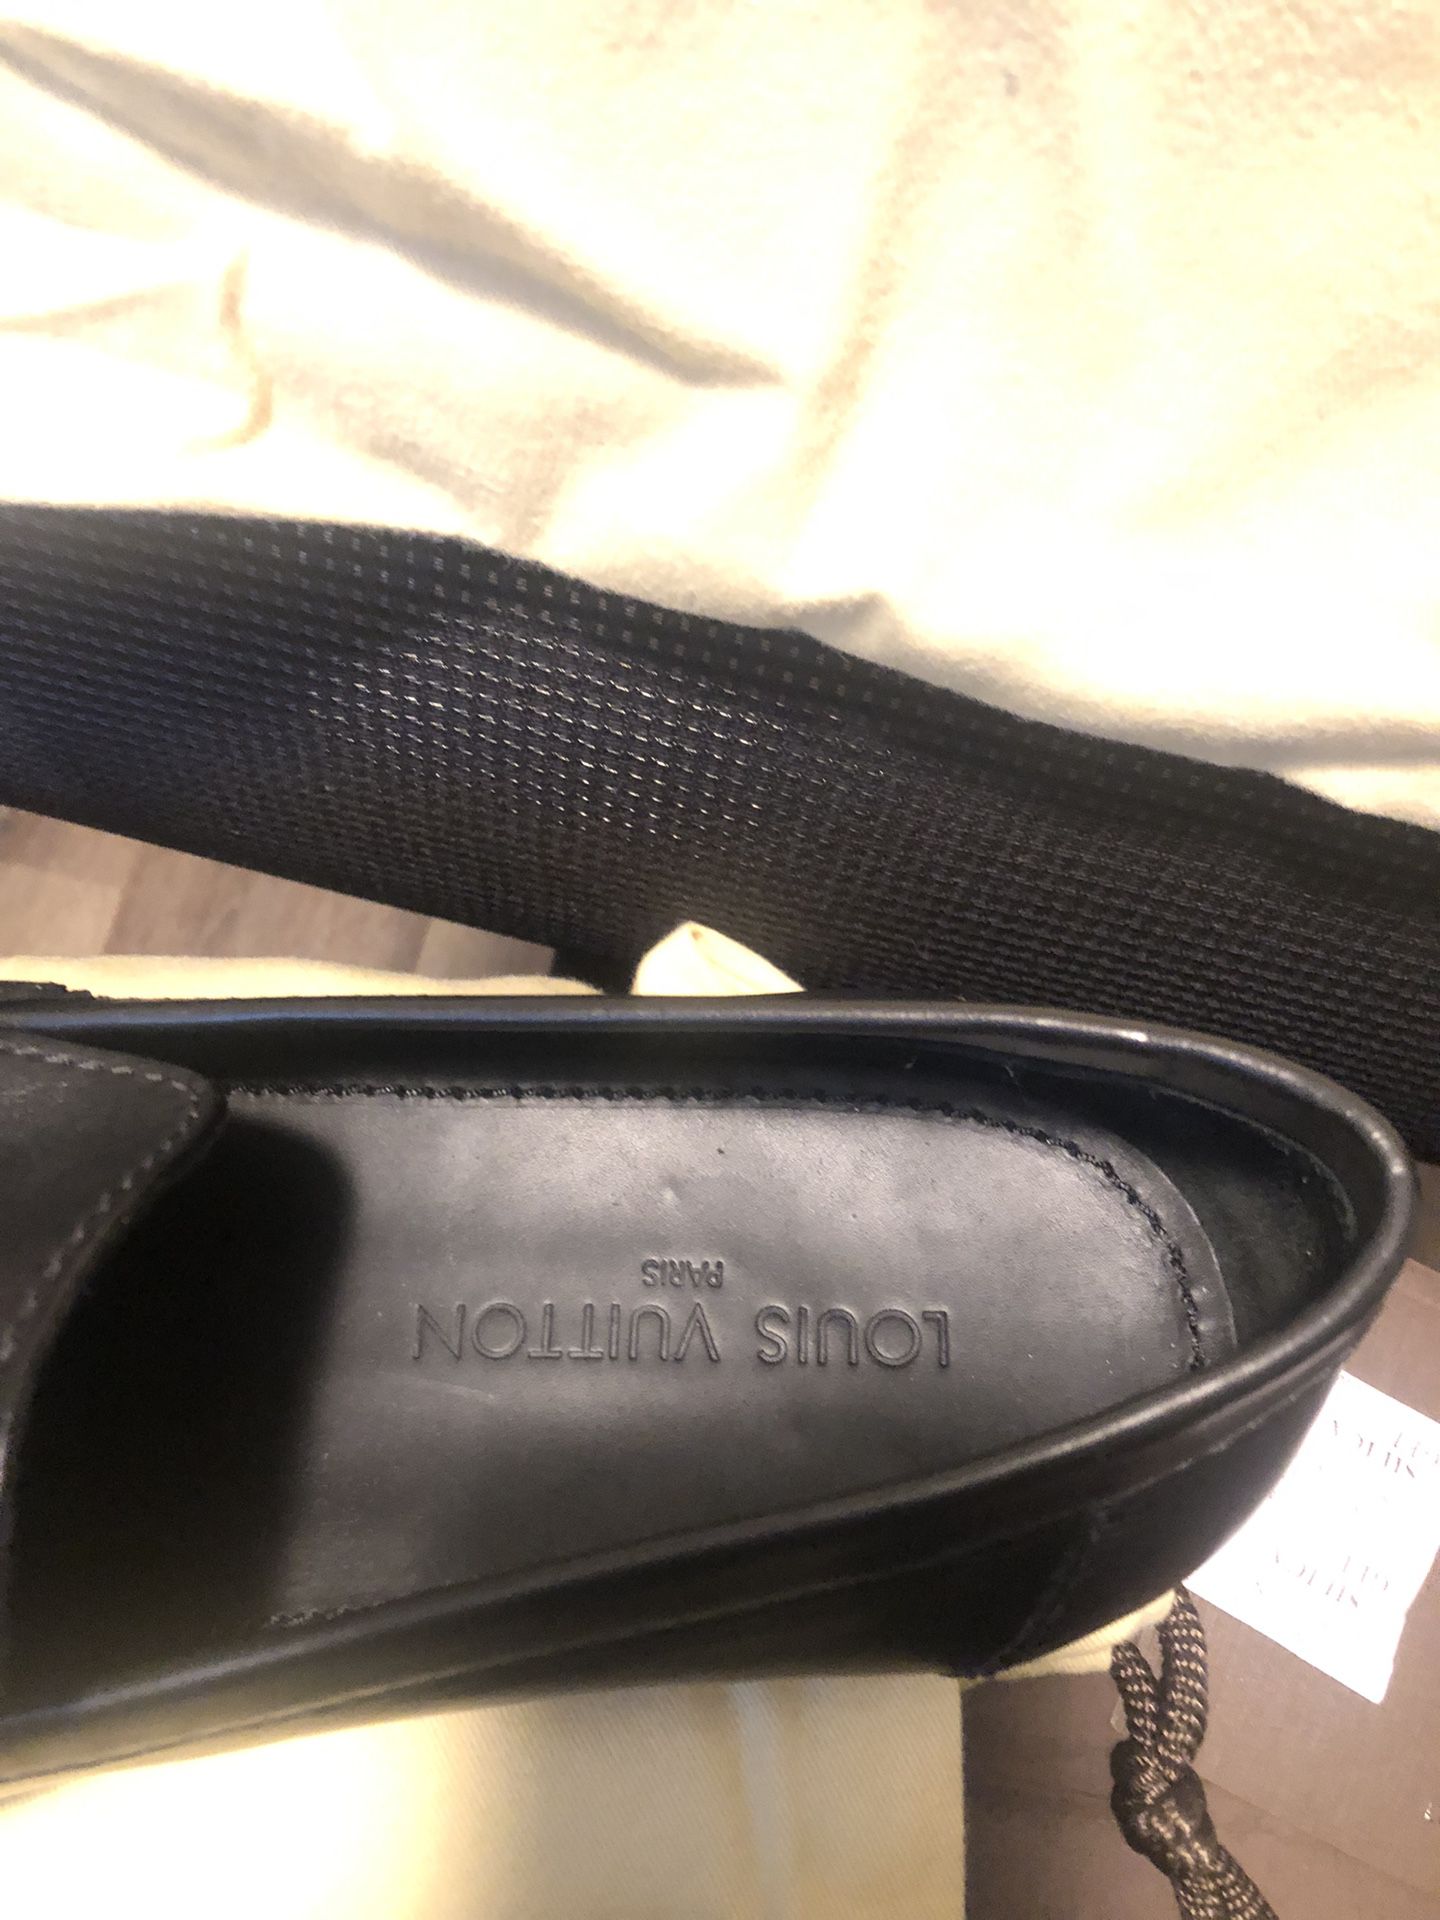 Mens Louis Vuitton Dress Shoes Size 10.5 Brown Leather Ships To USA for  Sale in Oceanside, CA - OfferUp